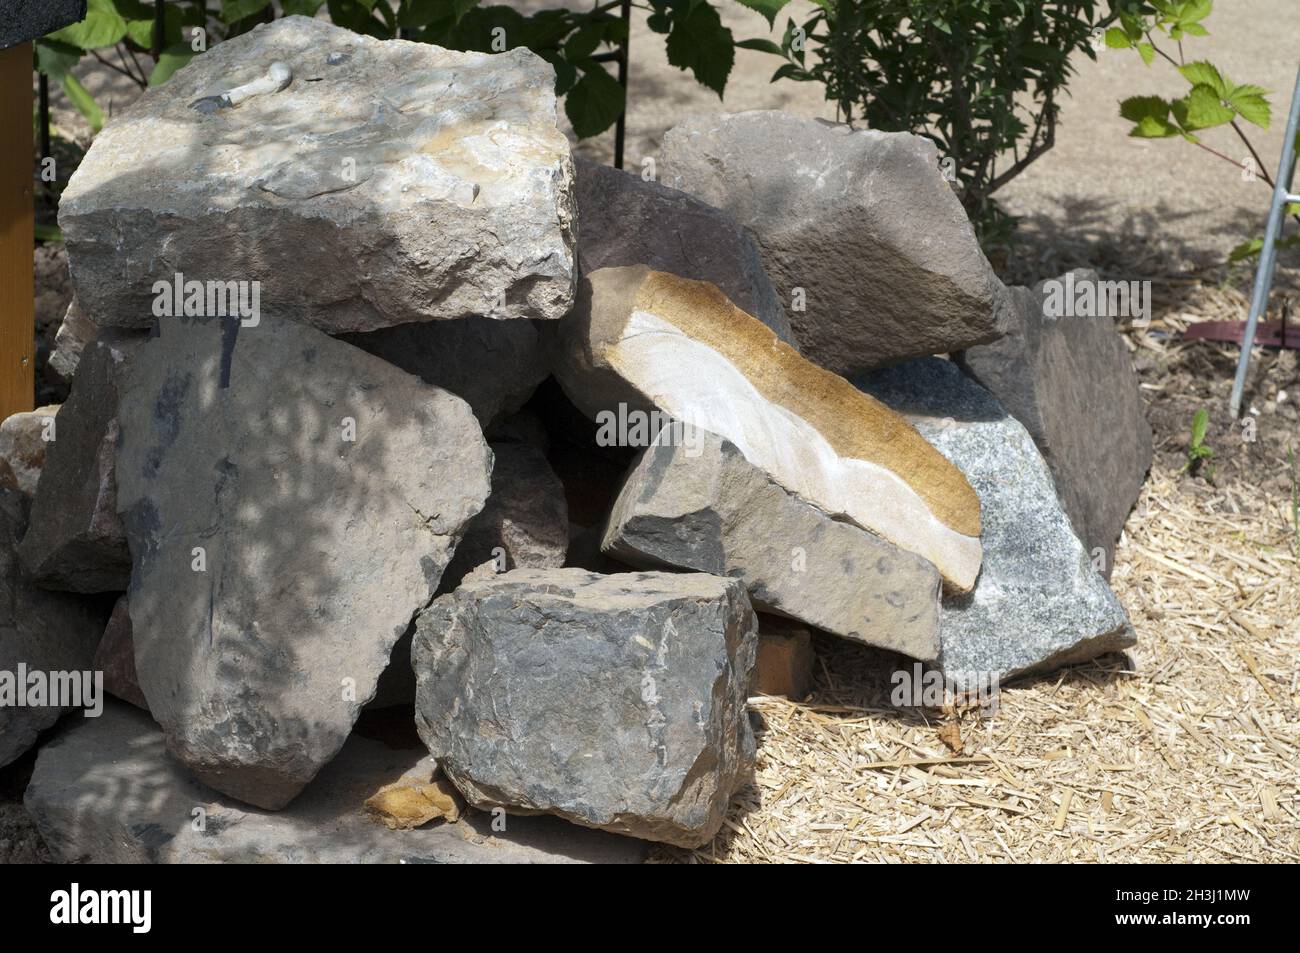 Cairn, Stones, Shafted, Shelter Stockfoto